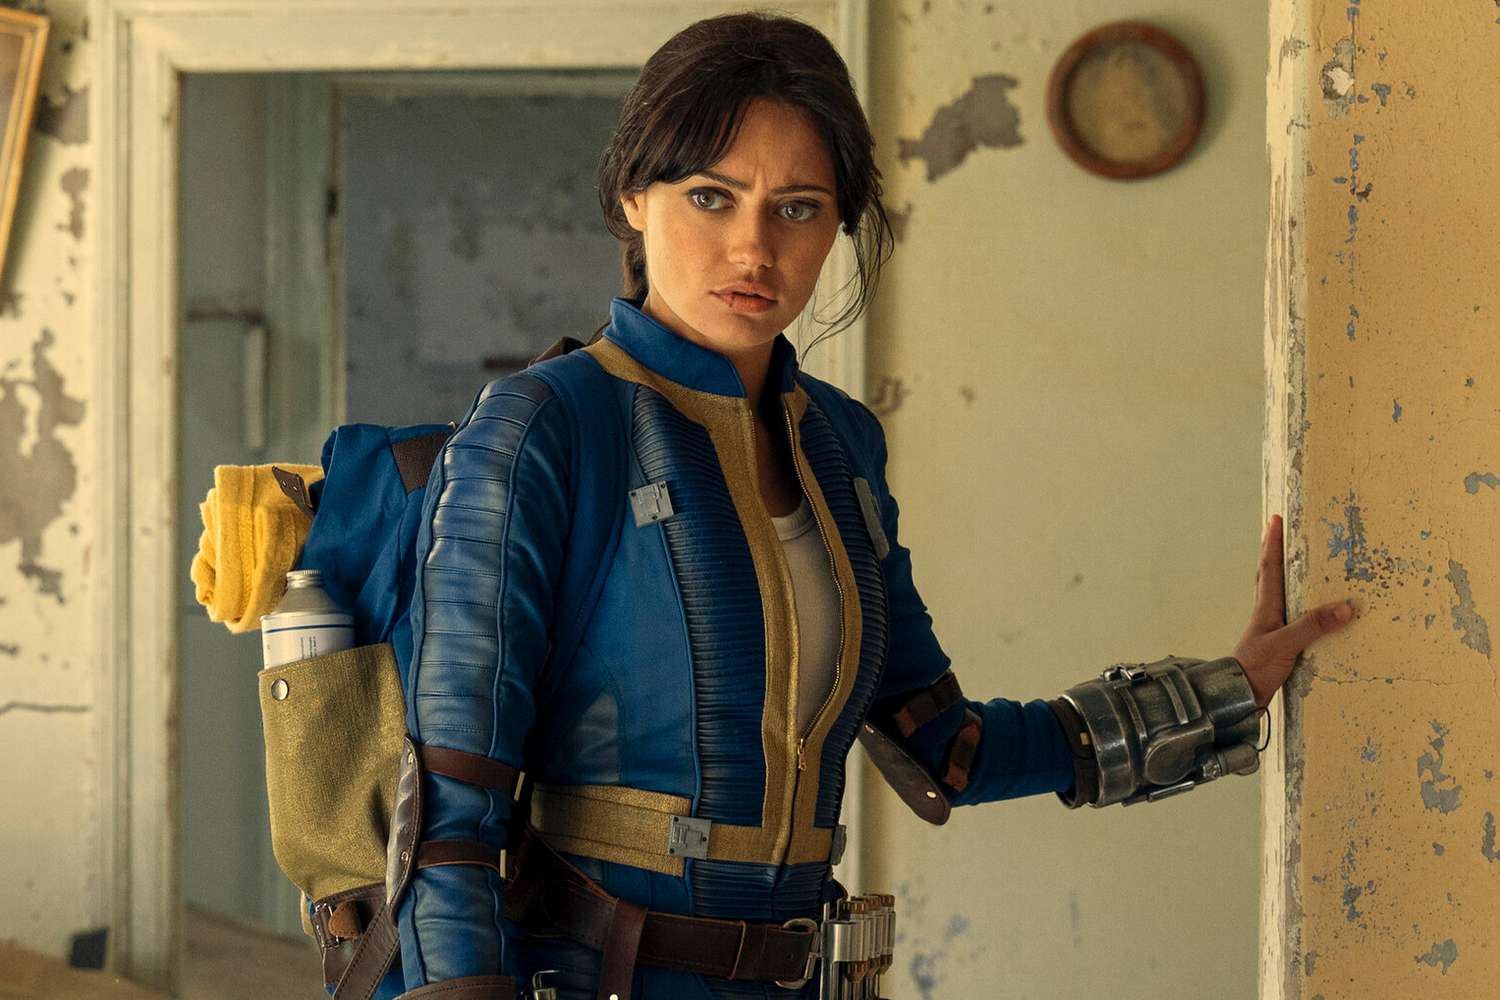 Ella Purnell Discusses Her Role in Fallout and Concerns About Typecasting